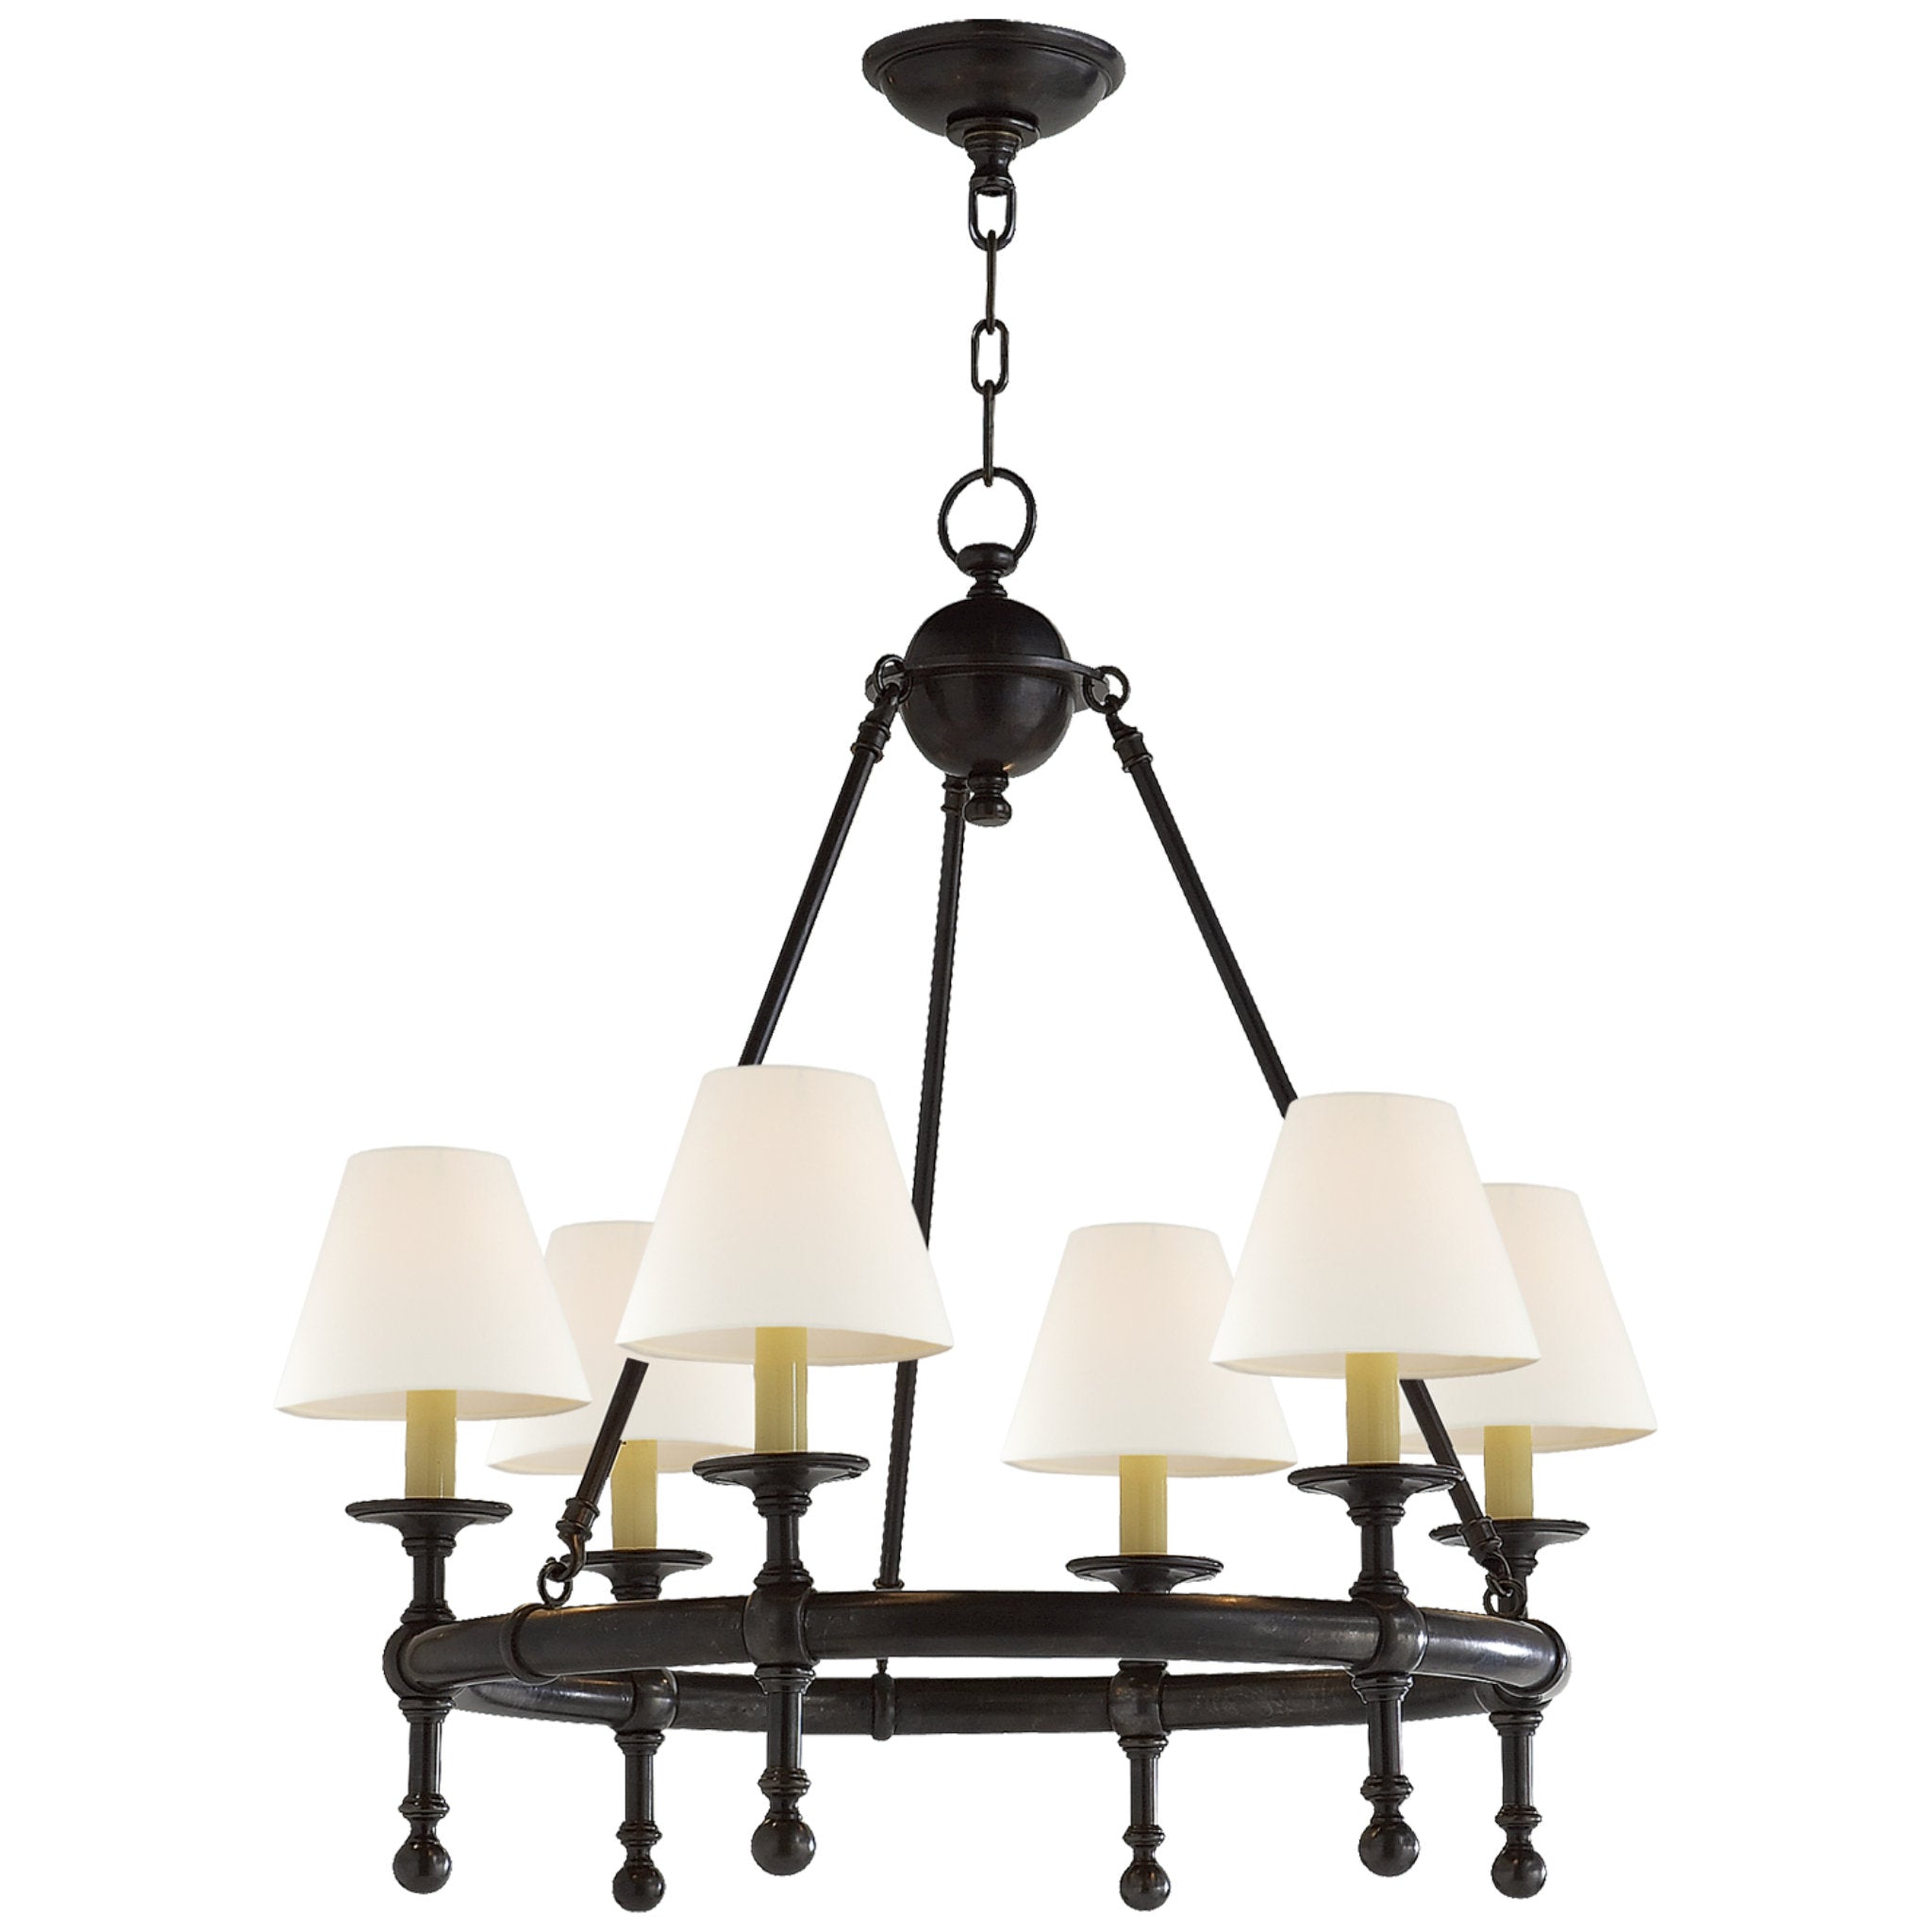 Chapman & Myers Classic Mini Ring Chandelier in Bronze with Linen Shades